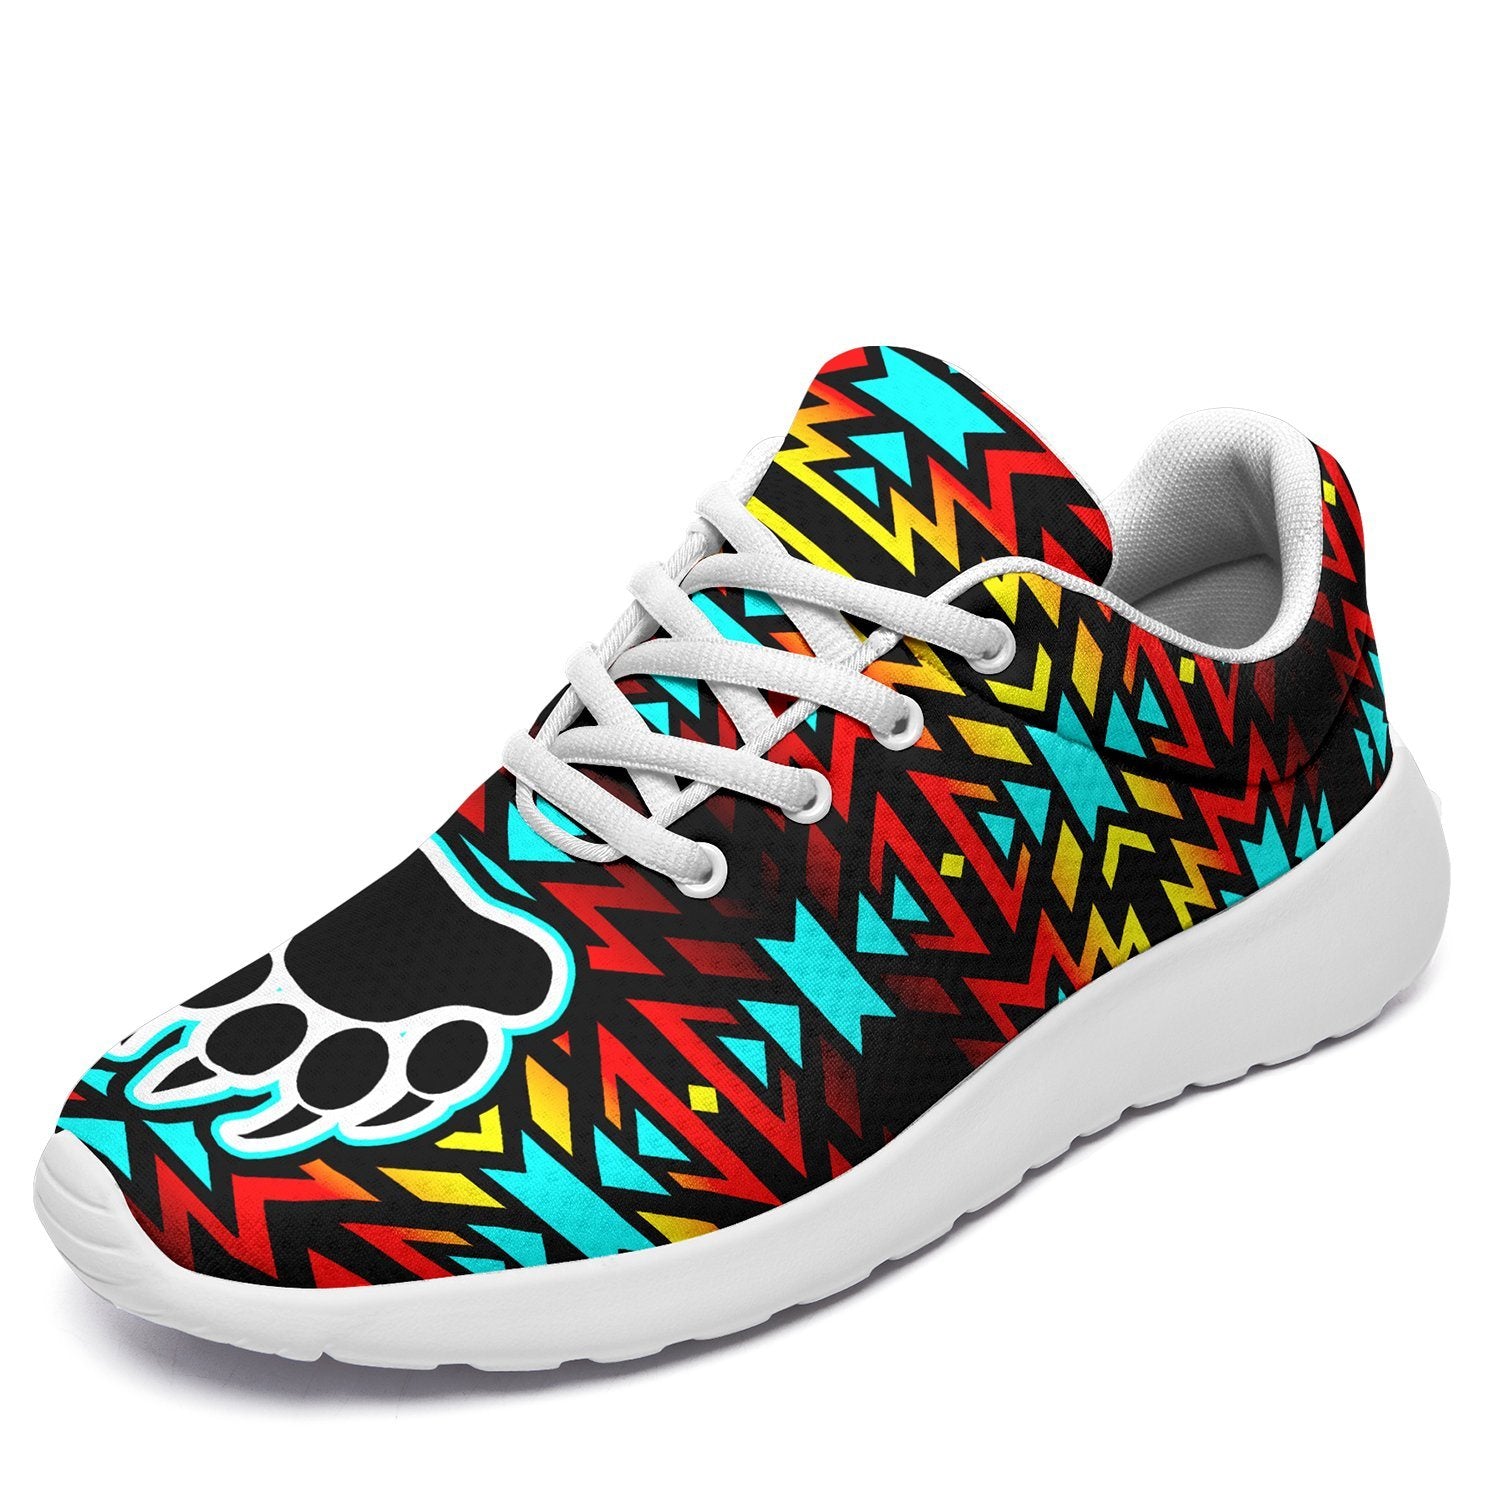 Fire Colors and Turquoise Bearpaw Ikkaayi Sport Sneakers 49 Dzine US Women 4.5 / US Youth 3.5 / EUR 35 White Sole 